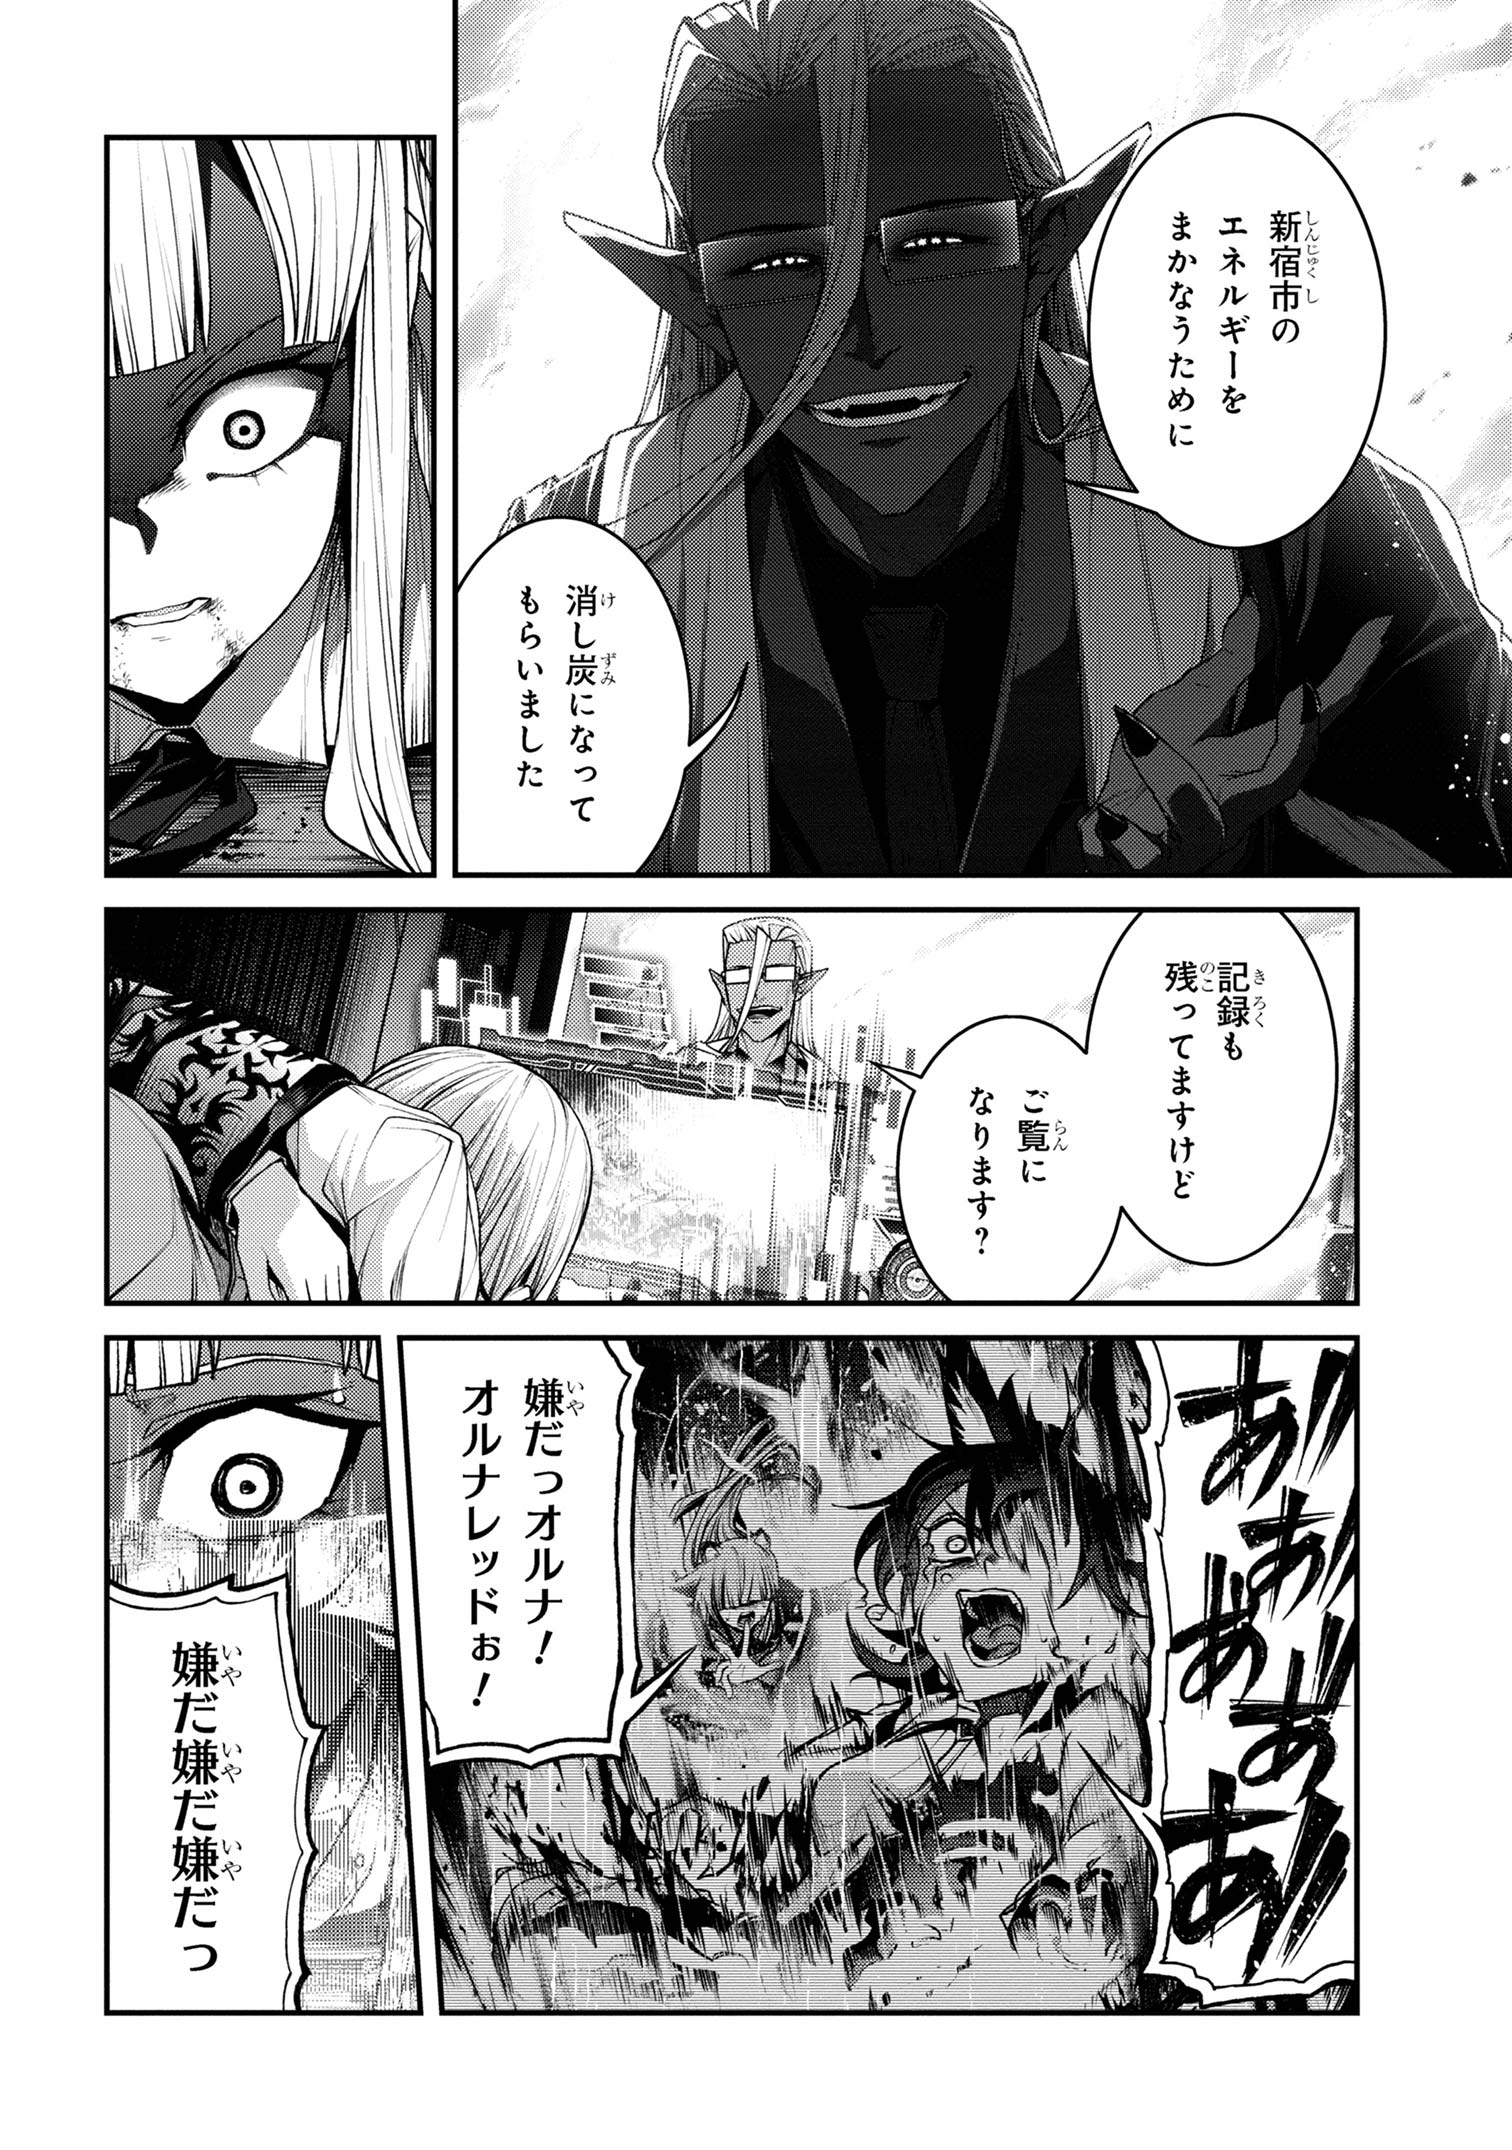 Maou 2099 - Chapter 10.1 - Page 12